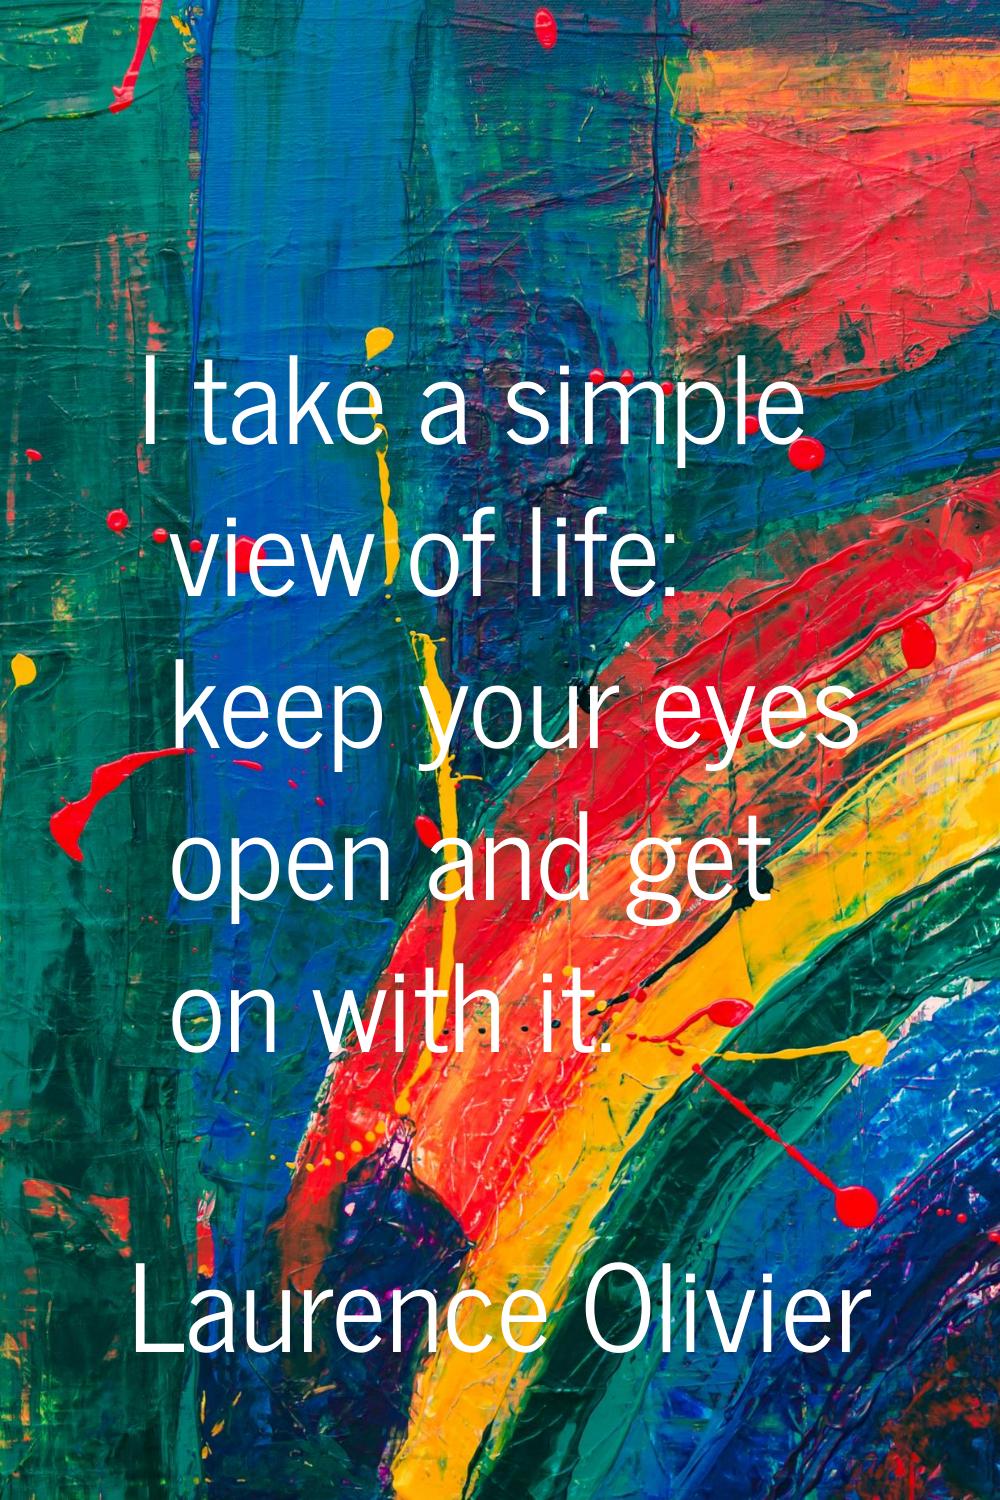 I take a simple view of life: keep your eyes open and get on with it.